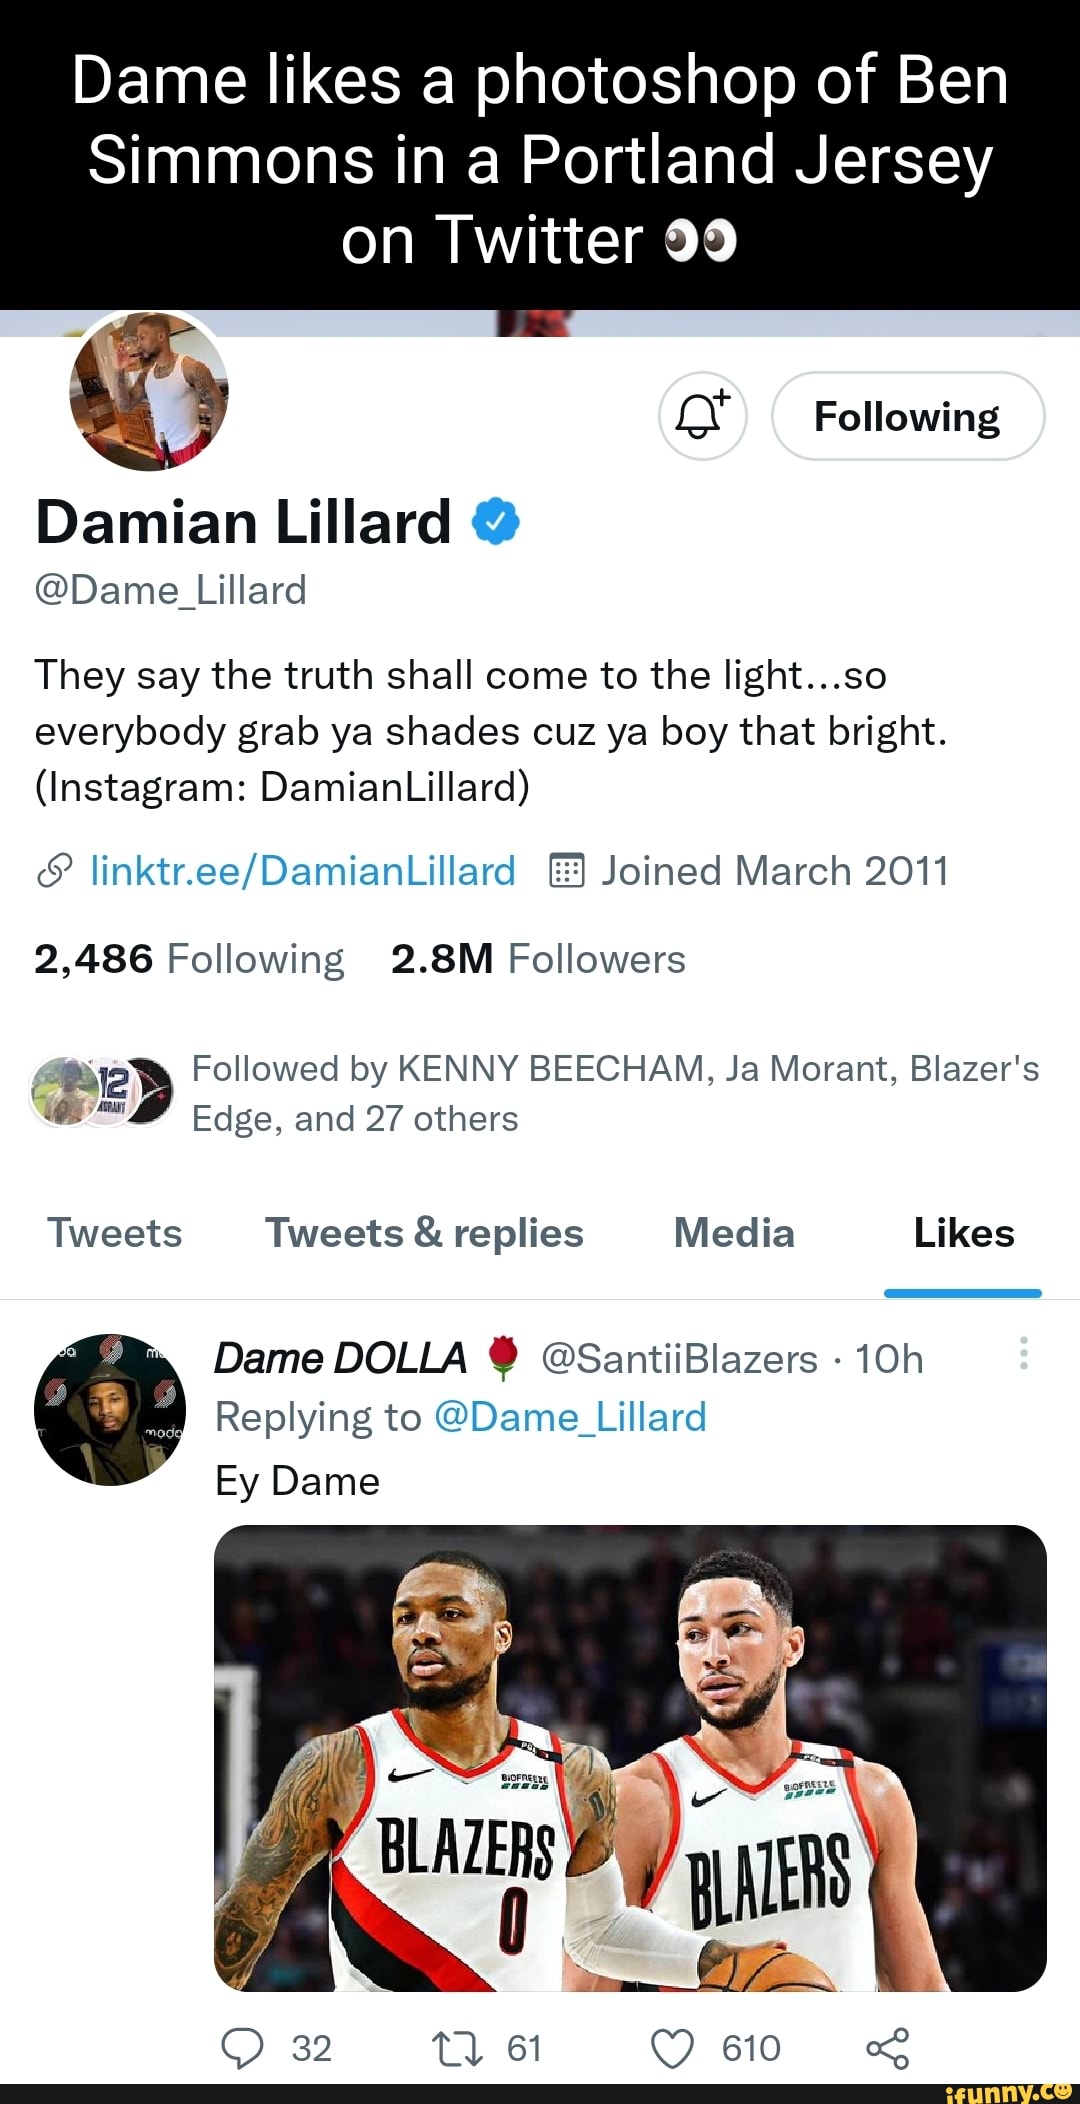 Dame likes a photoshop of Ben Simmons in a Portland Jersey on Twitter 99 Following Damian Lillard @ @Dame Lillard They say the truth shall come to the light...so everybody grab ya shades cuz ya boy that bright. (Instagram: DamianLillard) Joined March 2011 2,486 Following 2.8M Followers Followed by KENNY BEECHAM, Ja Morant, Blazer's Edge, and 27 others Tweets Tweets & replies Media Likes Dame DOLLA @SantiiBlazers - Replying to @Dame Lillard 32 io Ey Dame